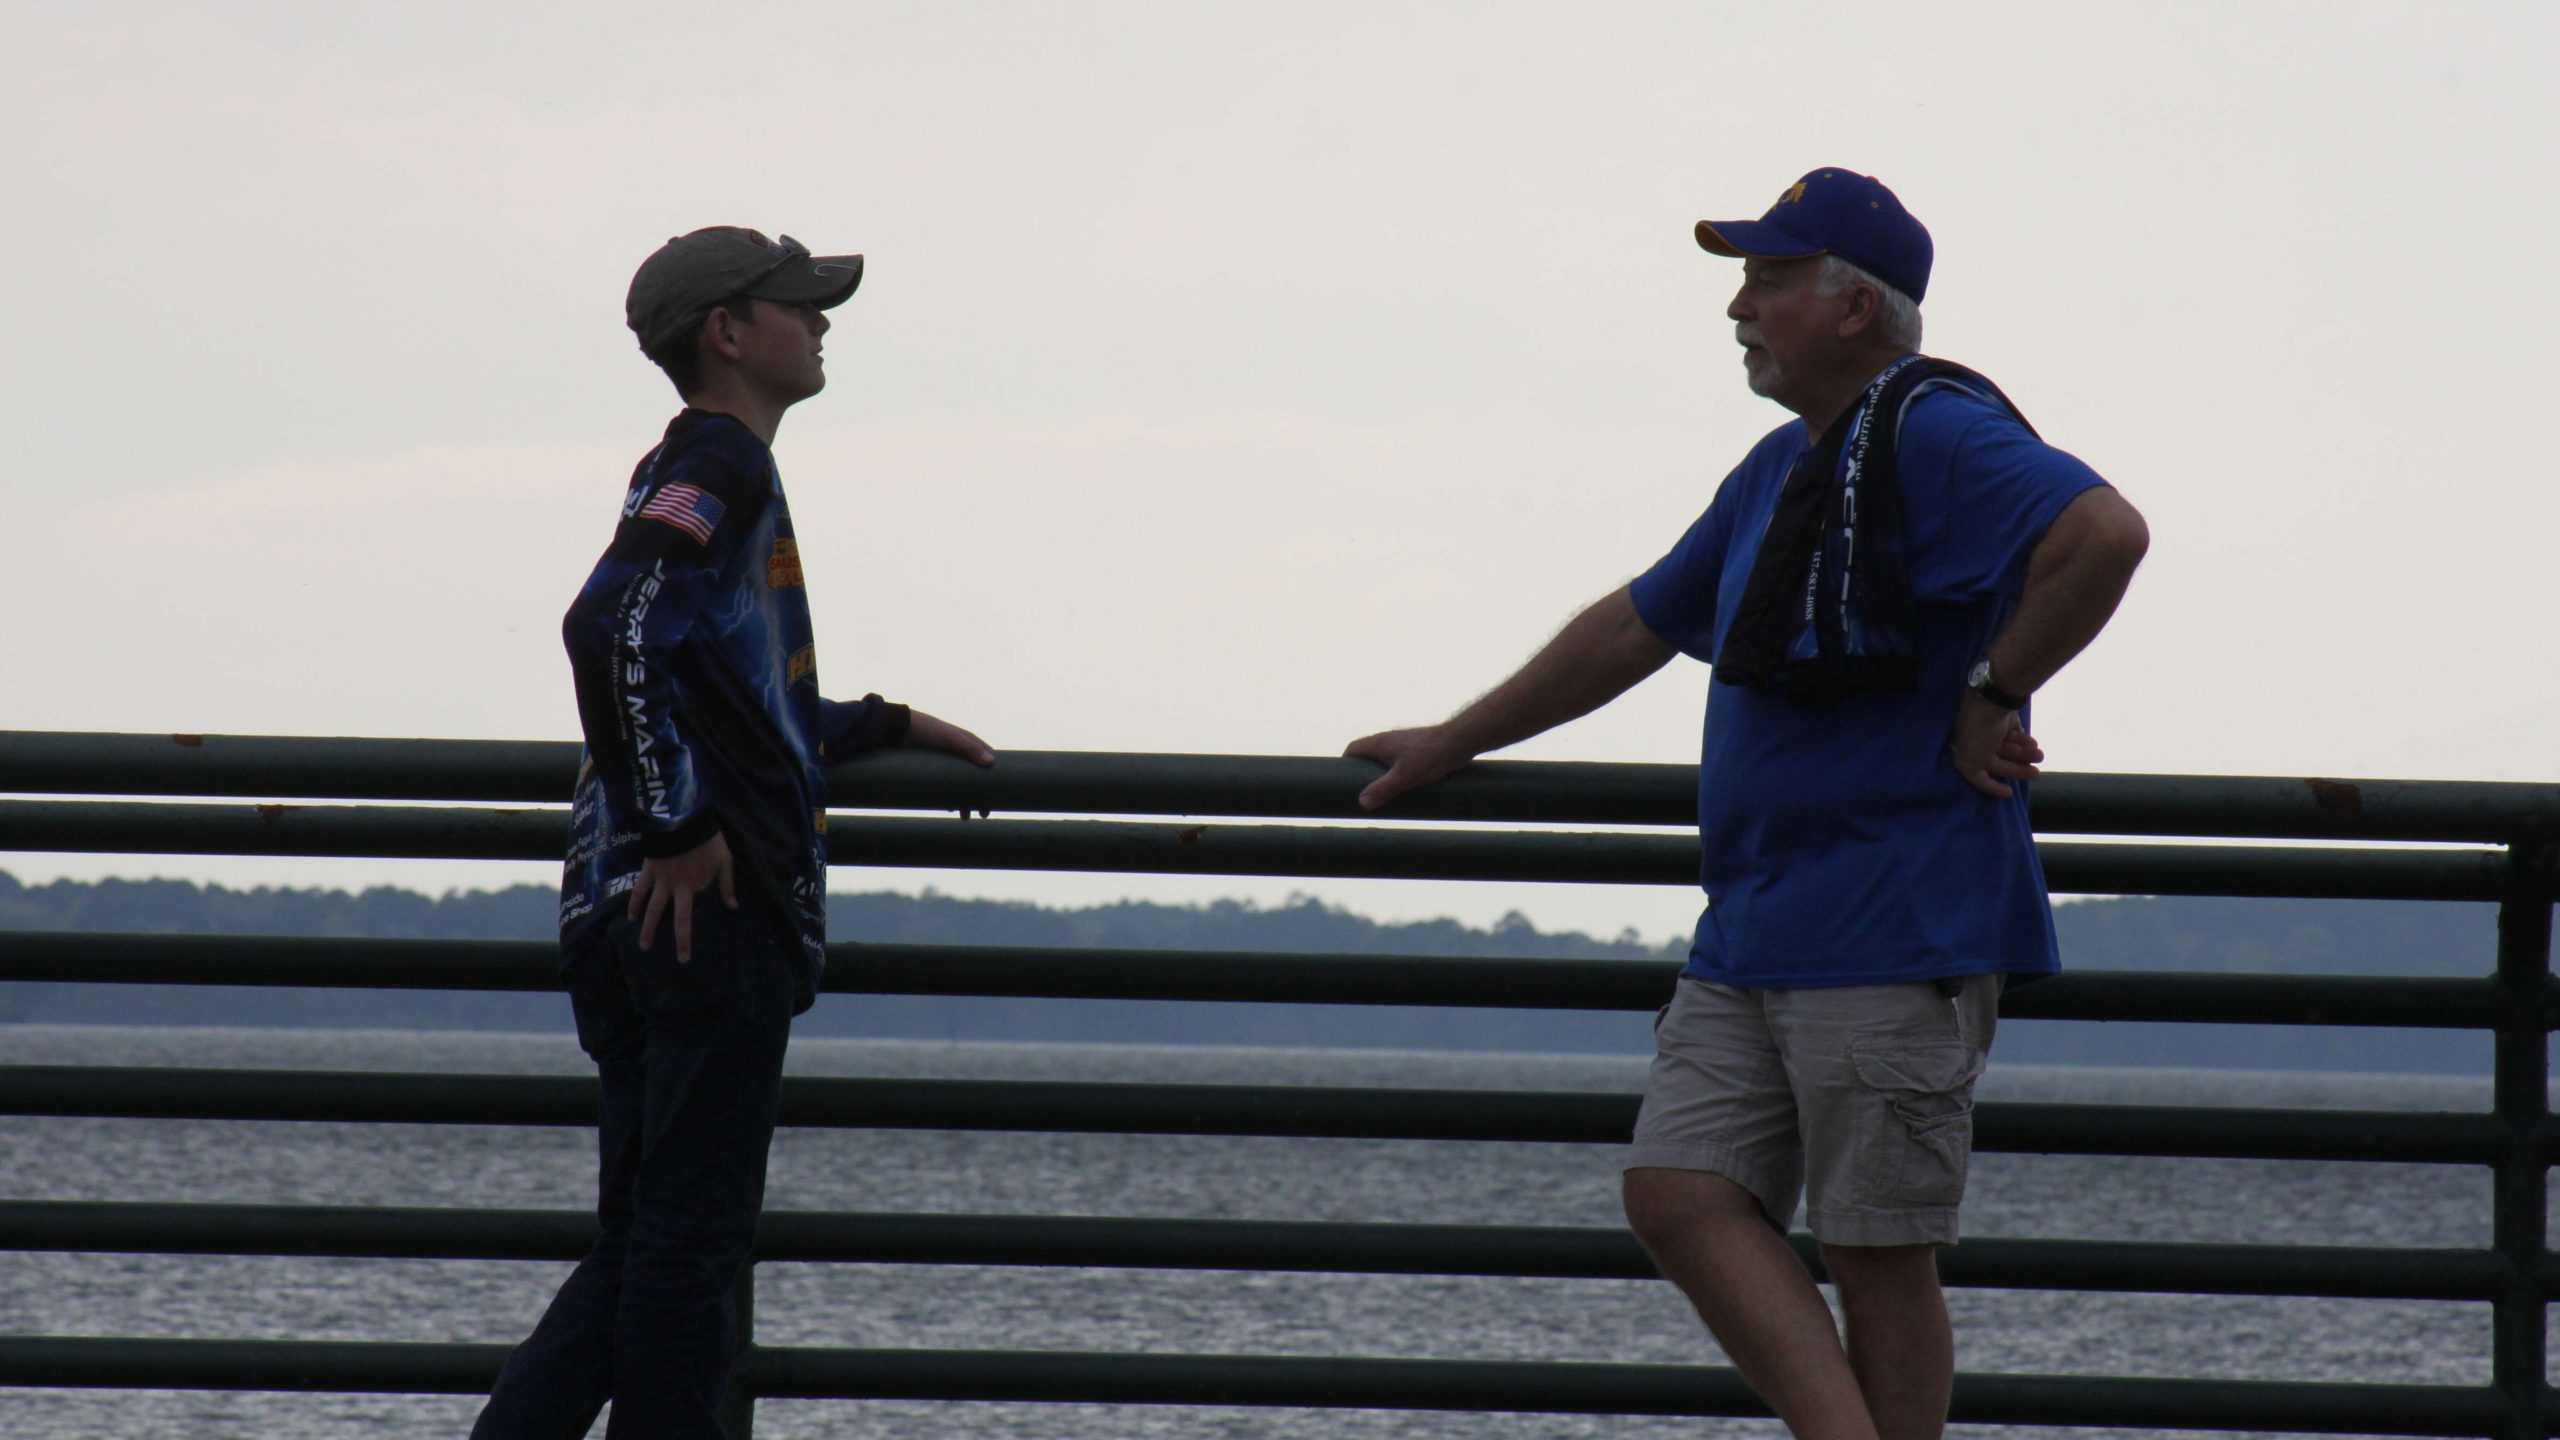 A young Sulphur High angler gets some advice from his boat
captain as the sun sets on Toledo Bend.